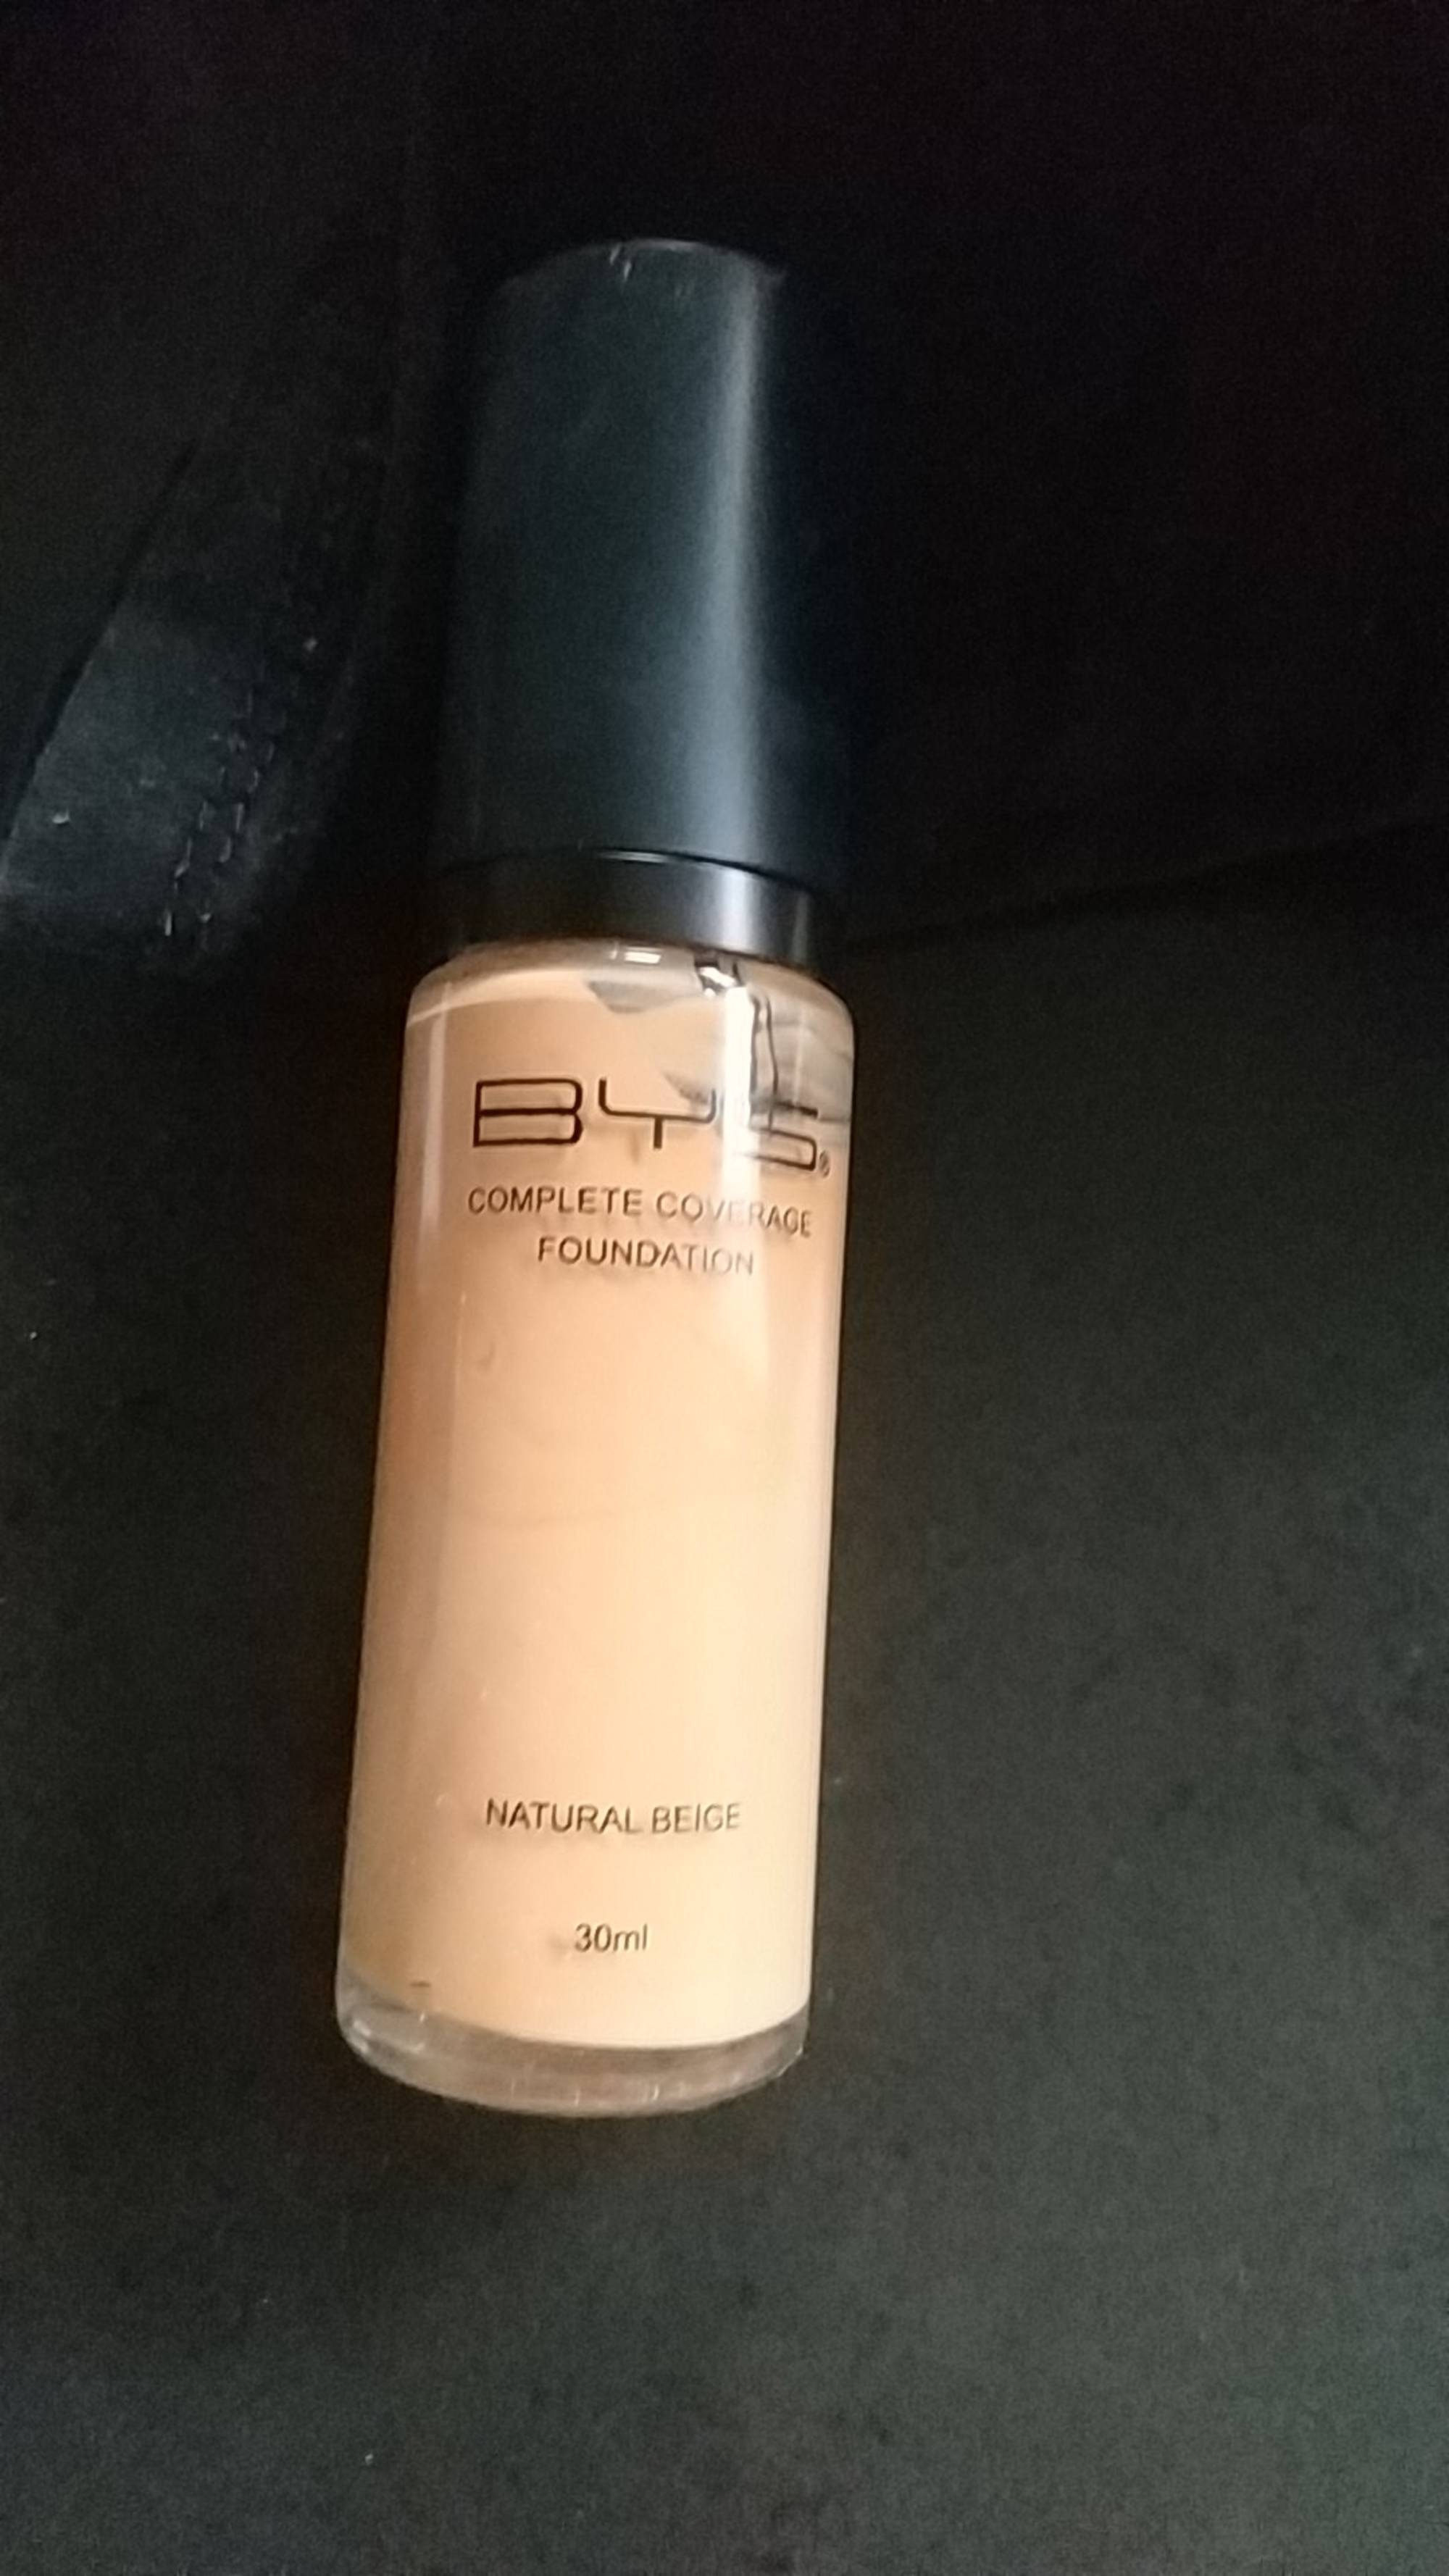 BYS - Complete coverage foundation natural beige 